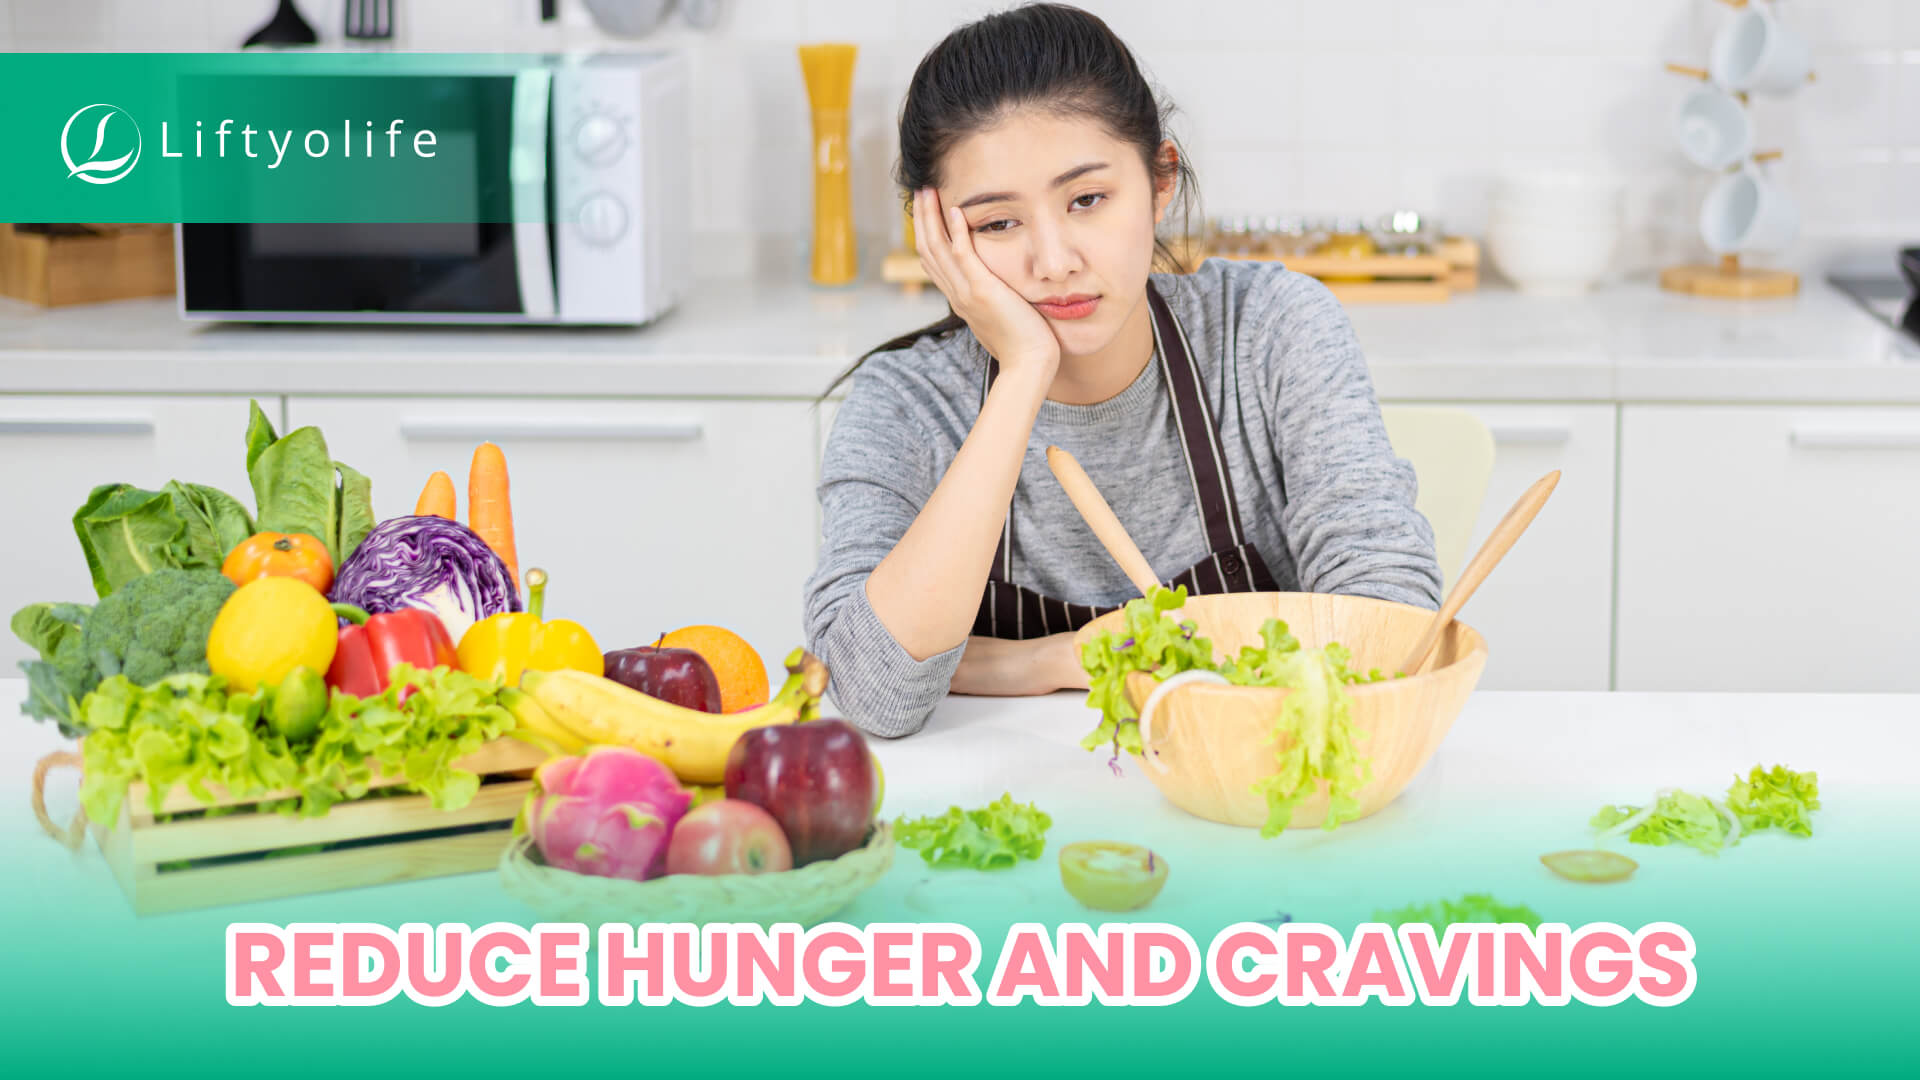 Do Frequent Meals Reduce Hunger and Cravings?